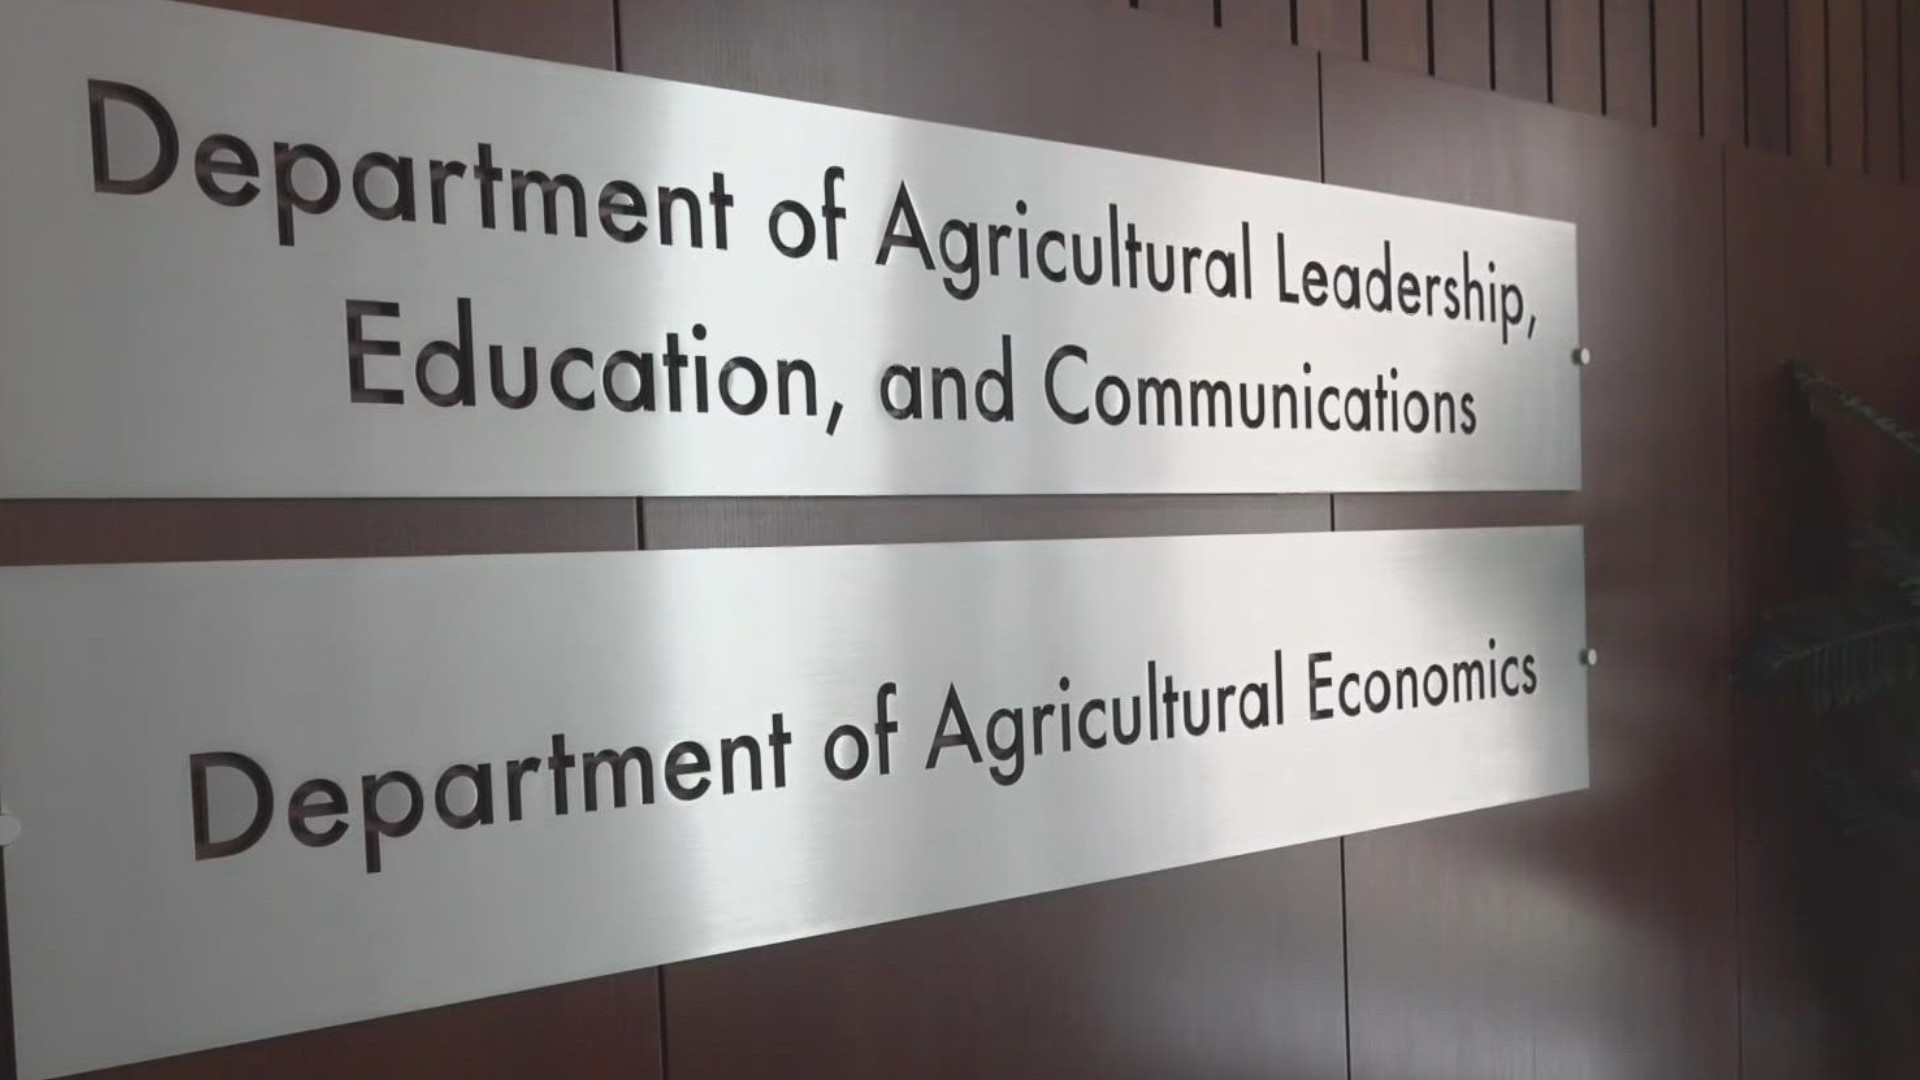 Texas A&M University leads in agriculture but is facing a professor shortage.